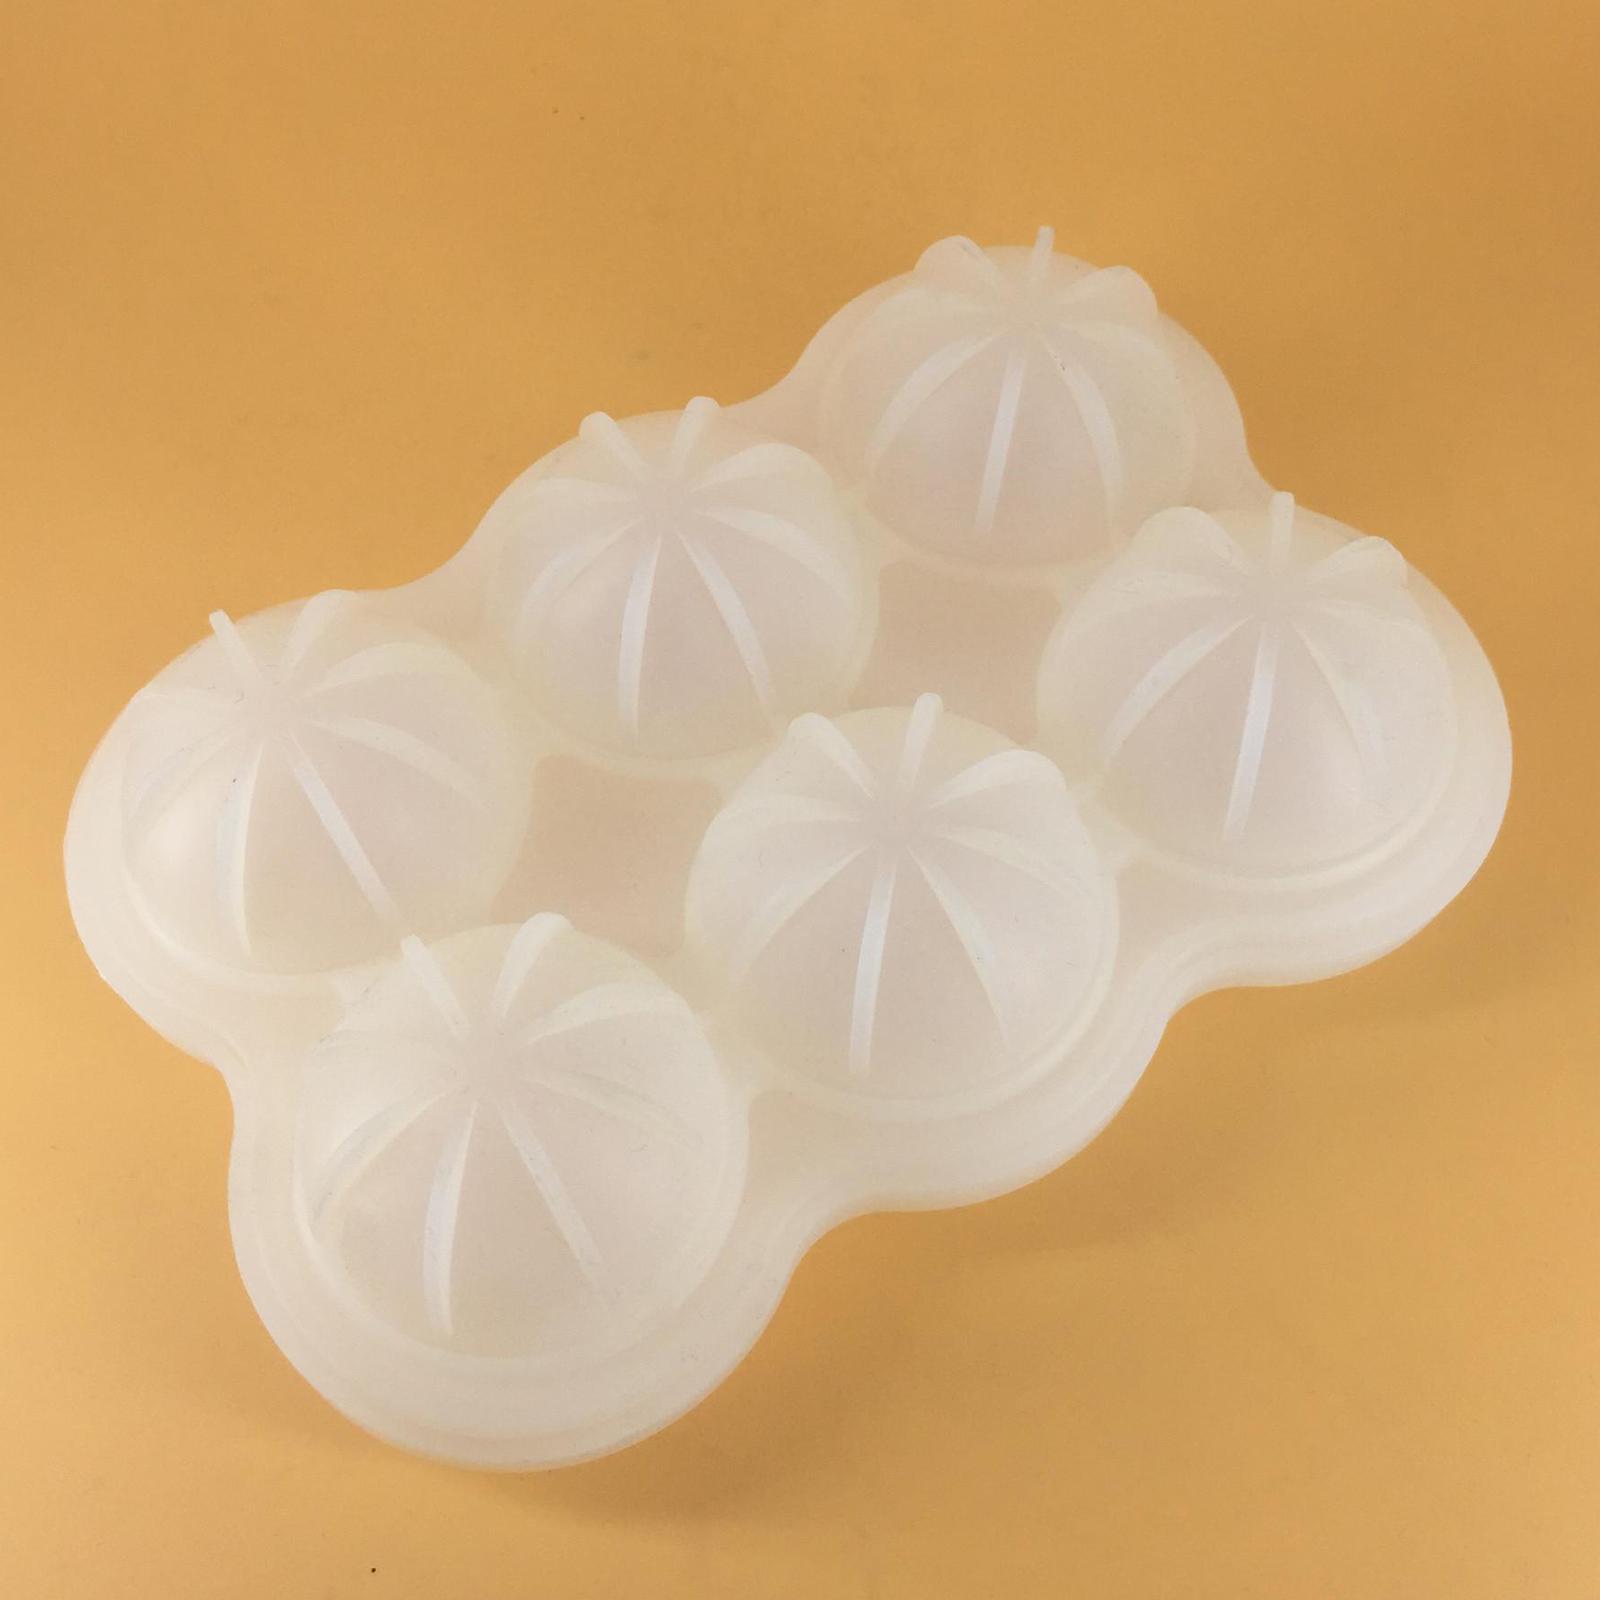 2x Round Ice Cube Ball Tray Silicone Sphere Mold Cocktails